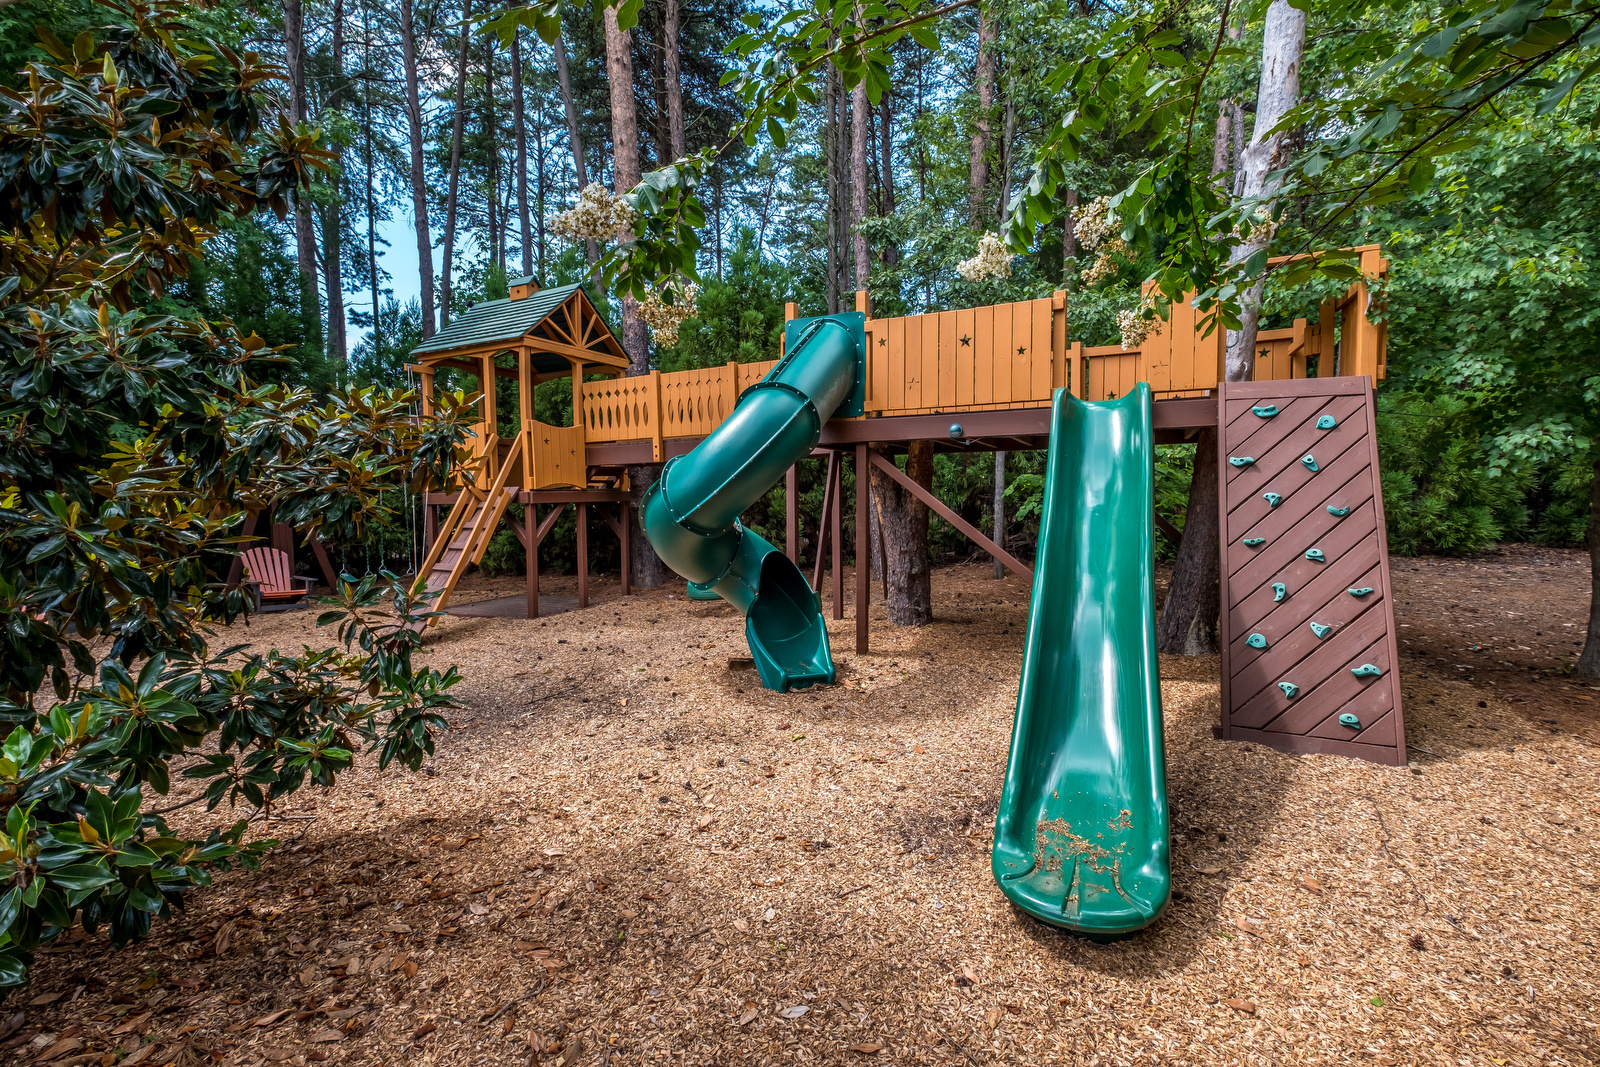 Backyard with kids playground with green slides and green details surrounded by trees